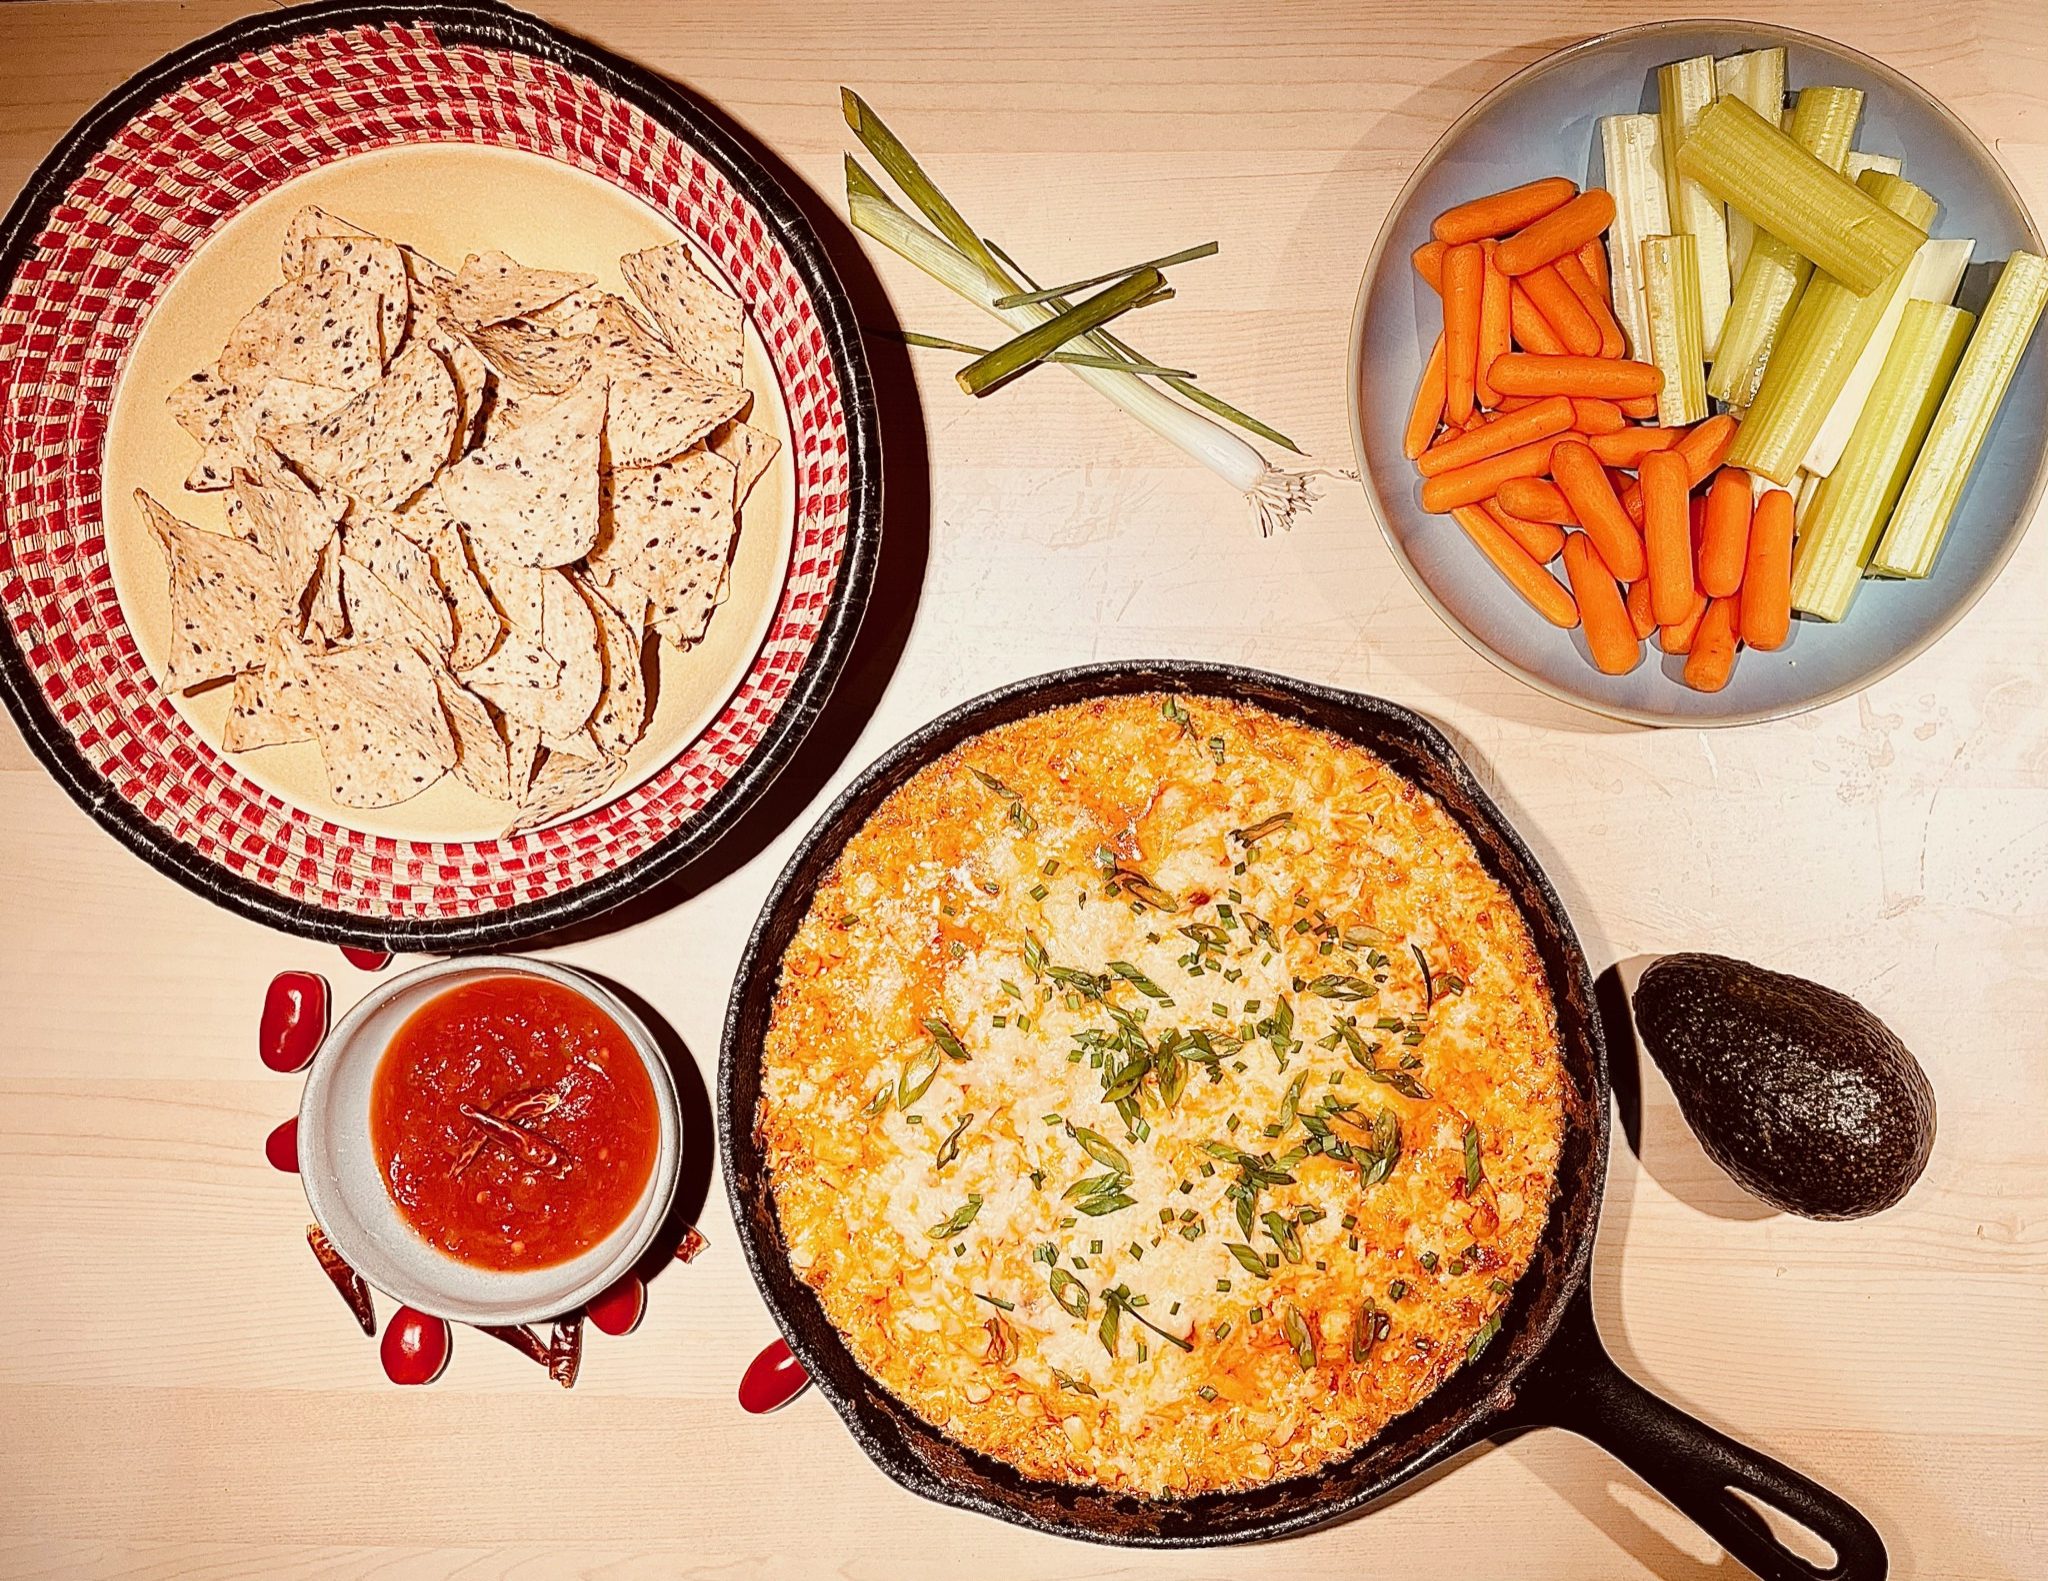 Bubbling buffalo chicken dip with chips and veggies.